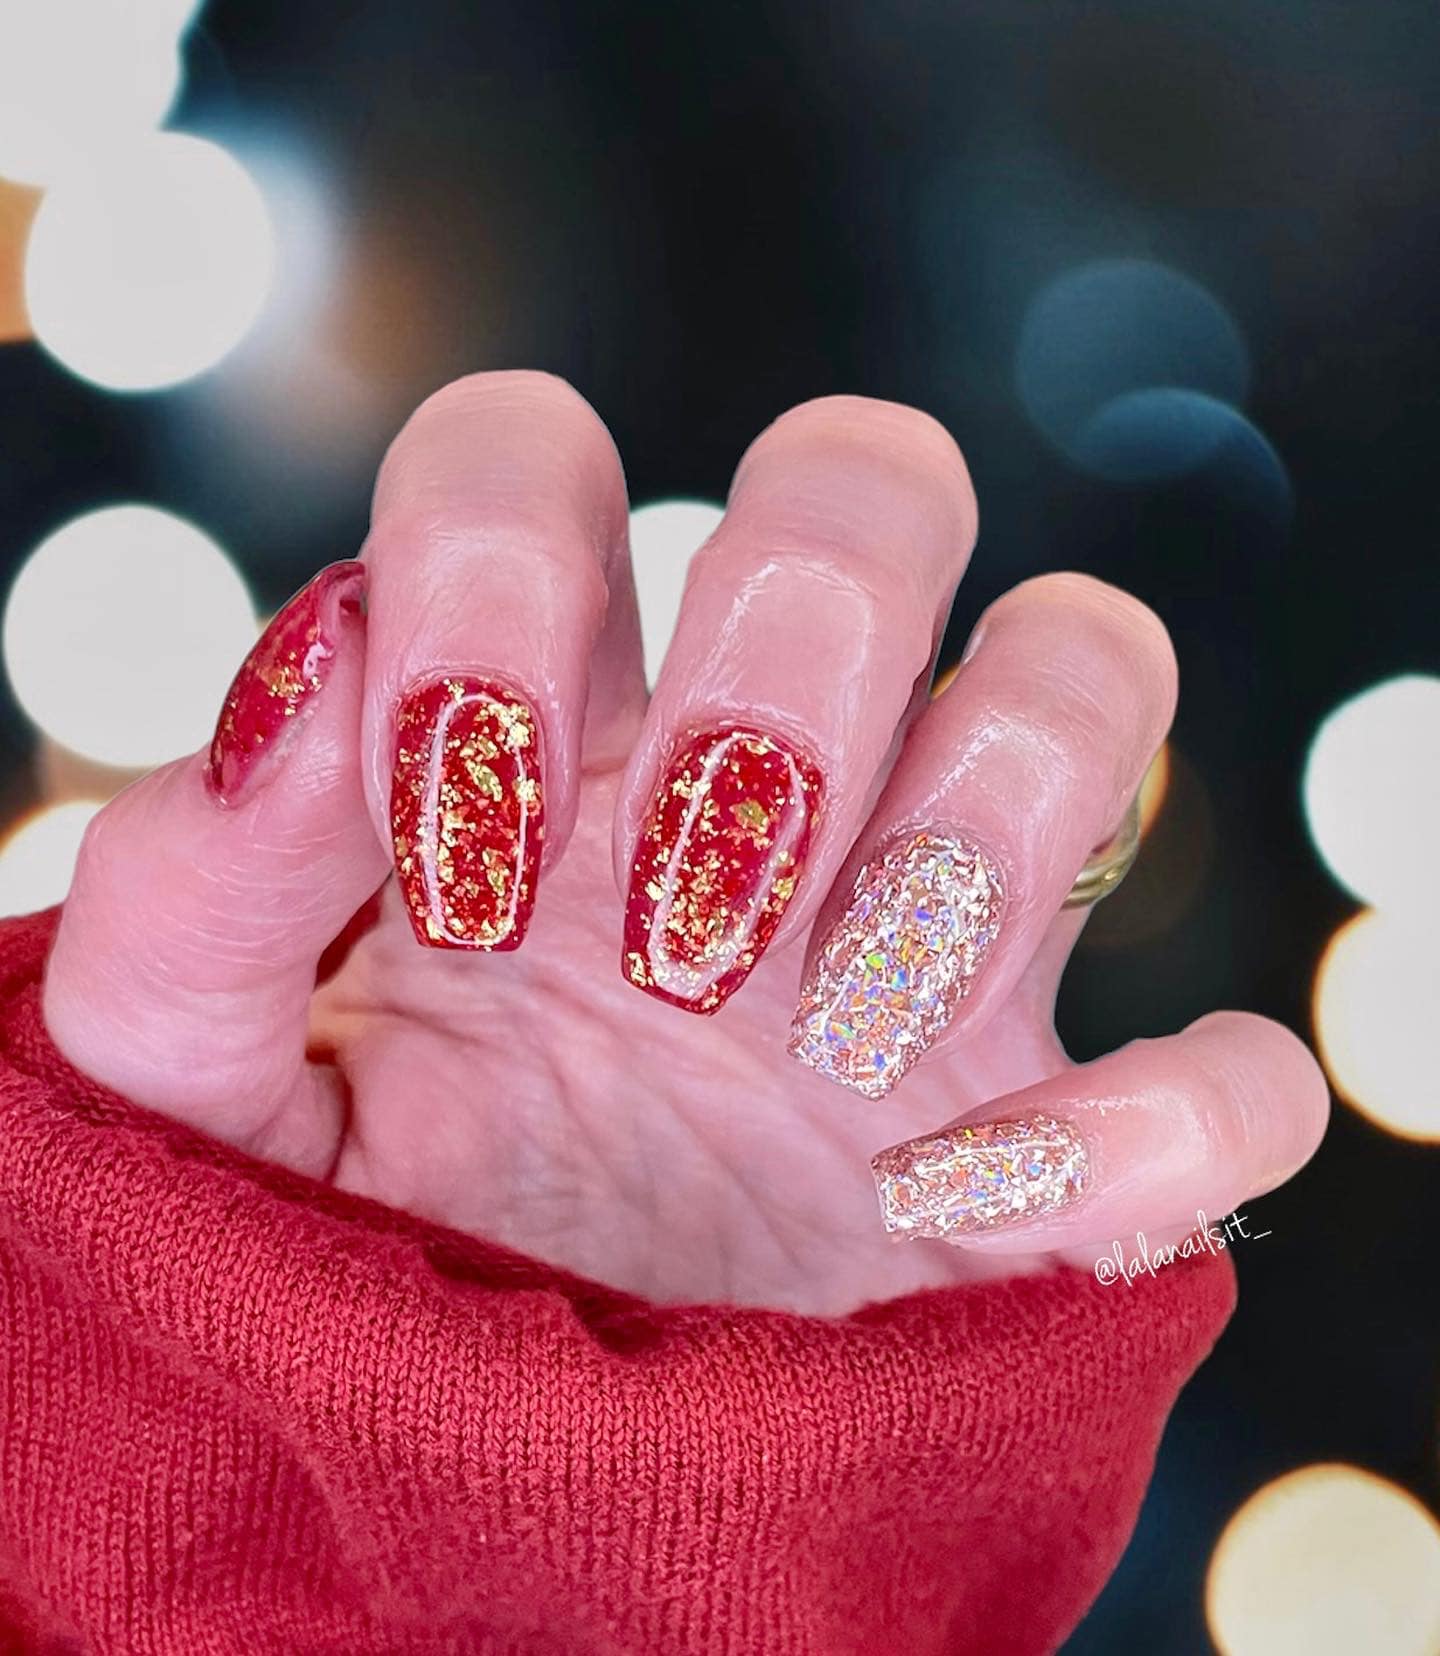 Stunning red French tips with gold decor @lexi_nails_spa #lexi_nails_spa # nails #nailsnyc #nailart #nailsofinstagram #nailsdesign… | Instagram